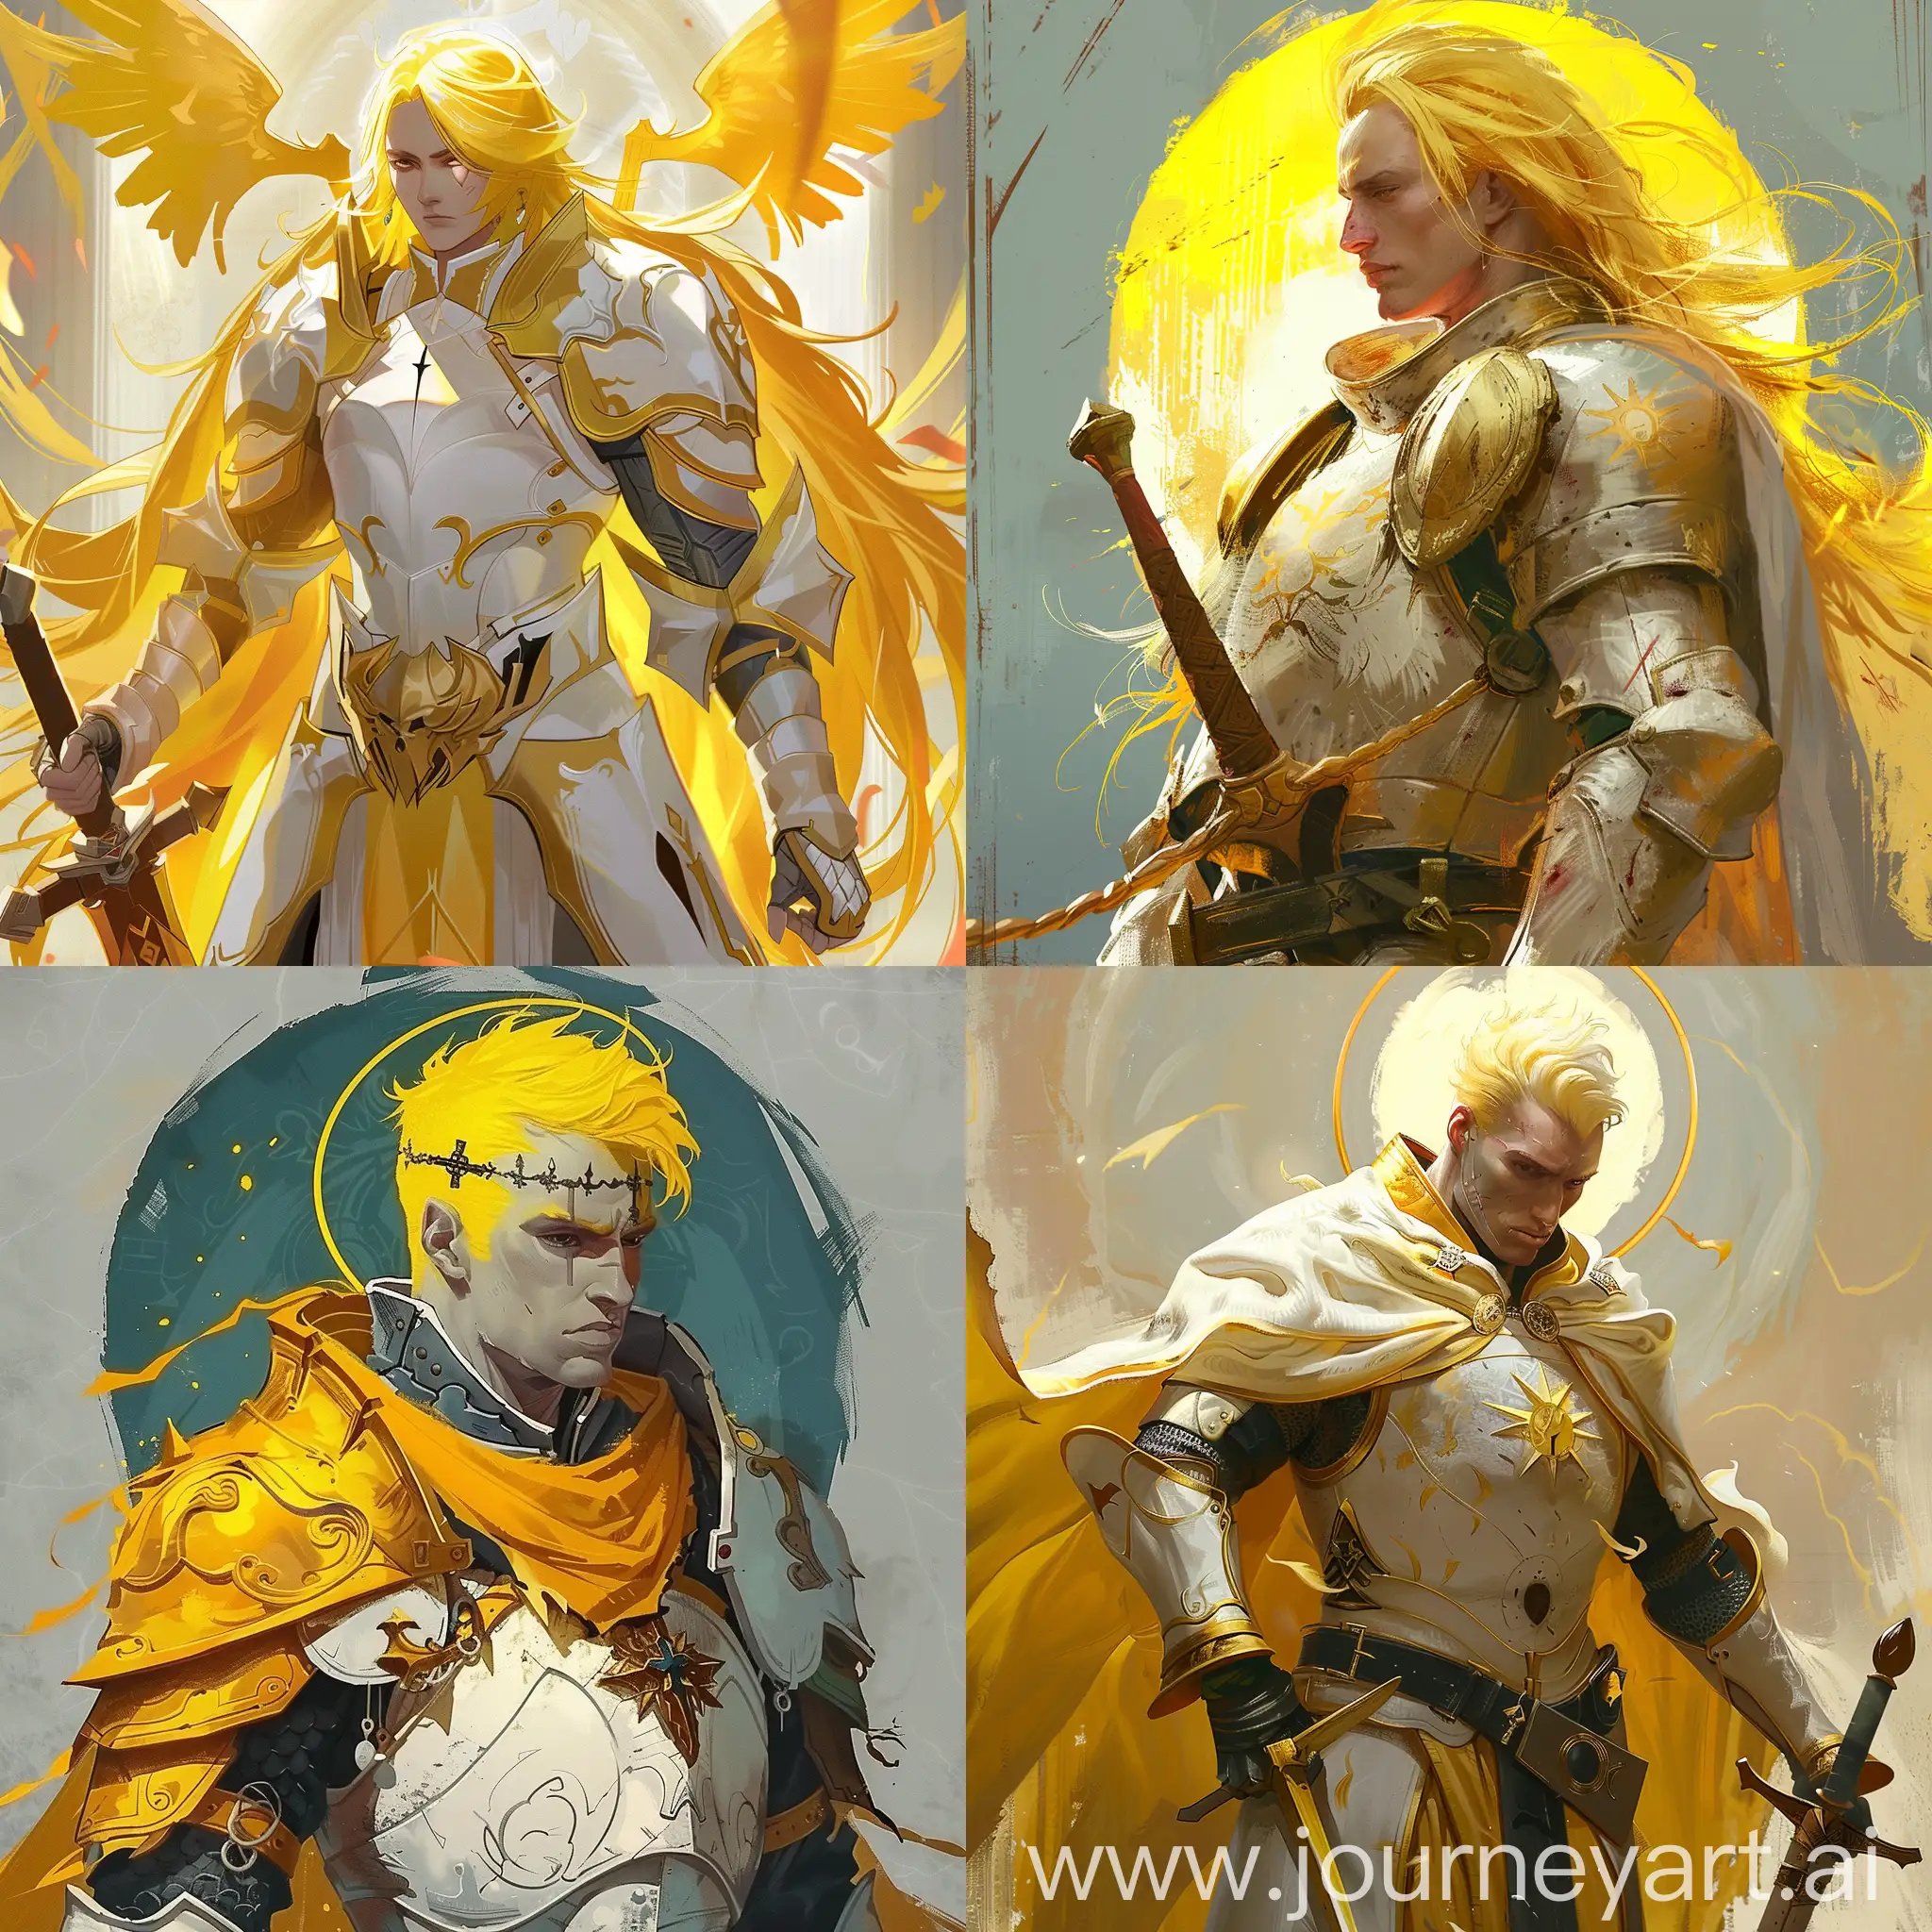 GoldenHaired-Holy-Knight-in-Ethereal-Landscape